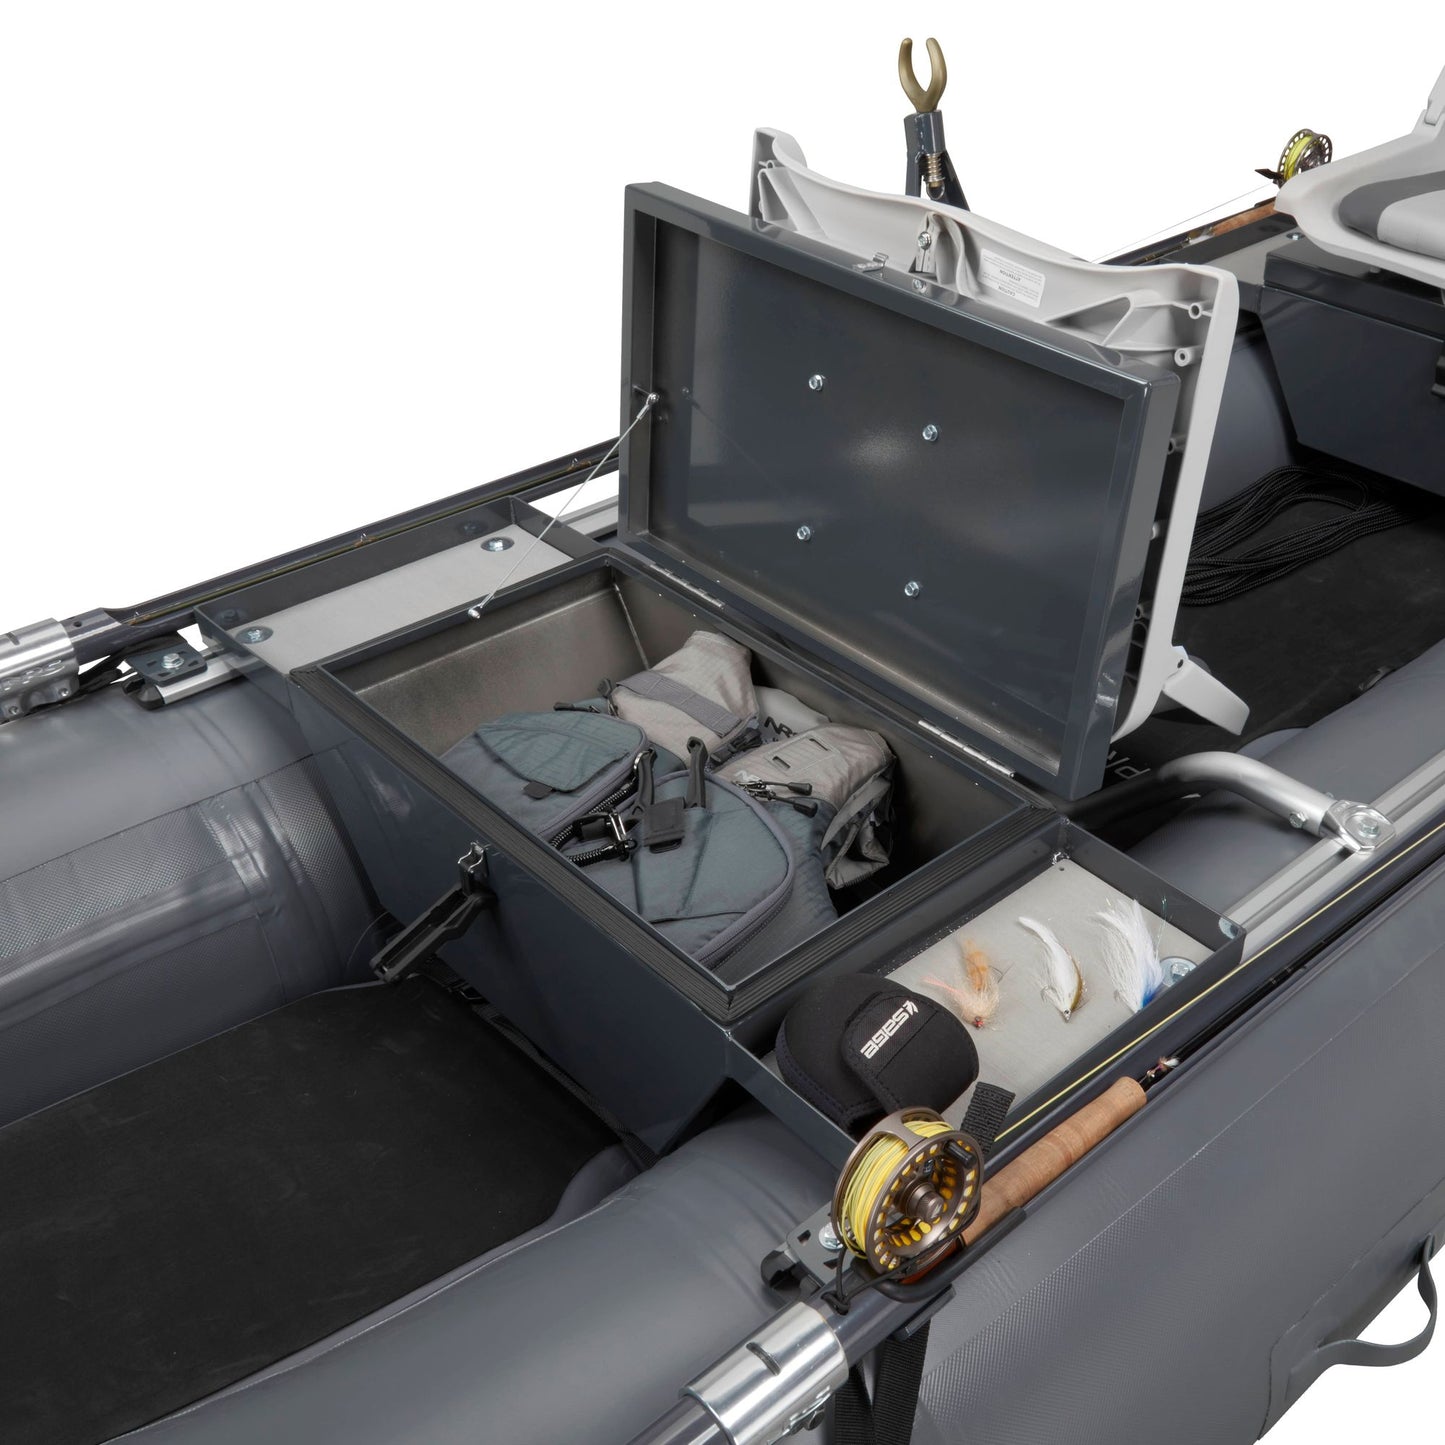 A NRS Approach Fishing Raft with an open storage compartment displaying gear and tackle.